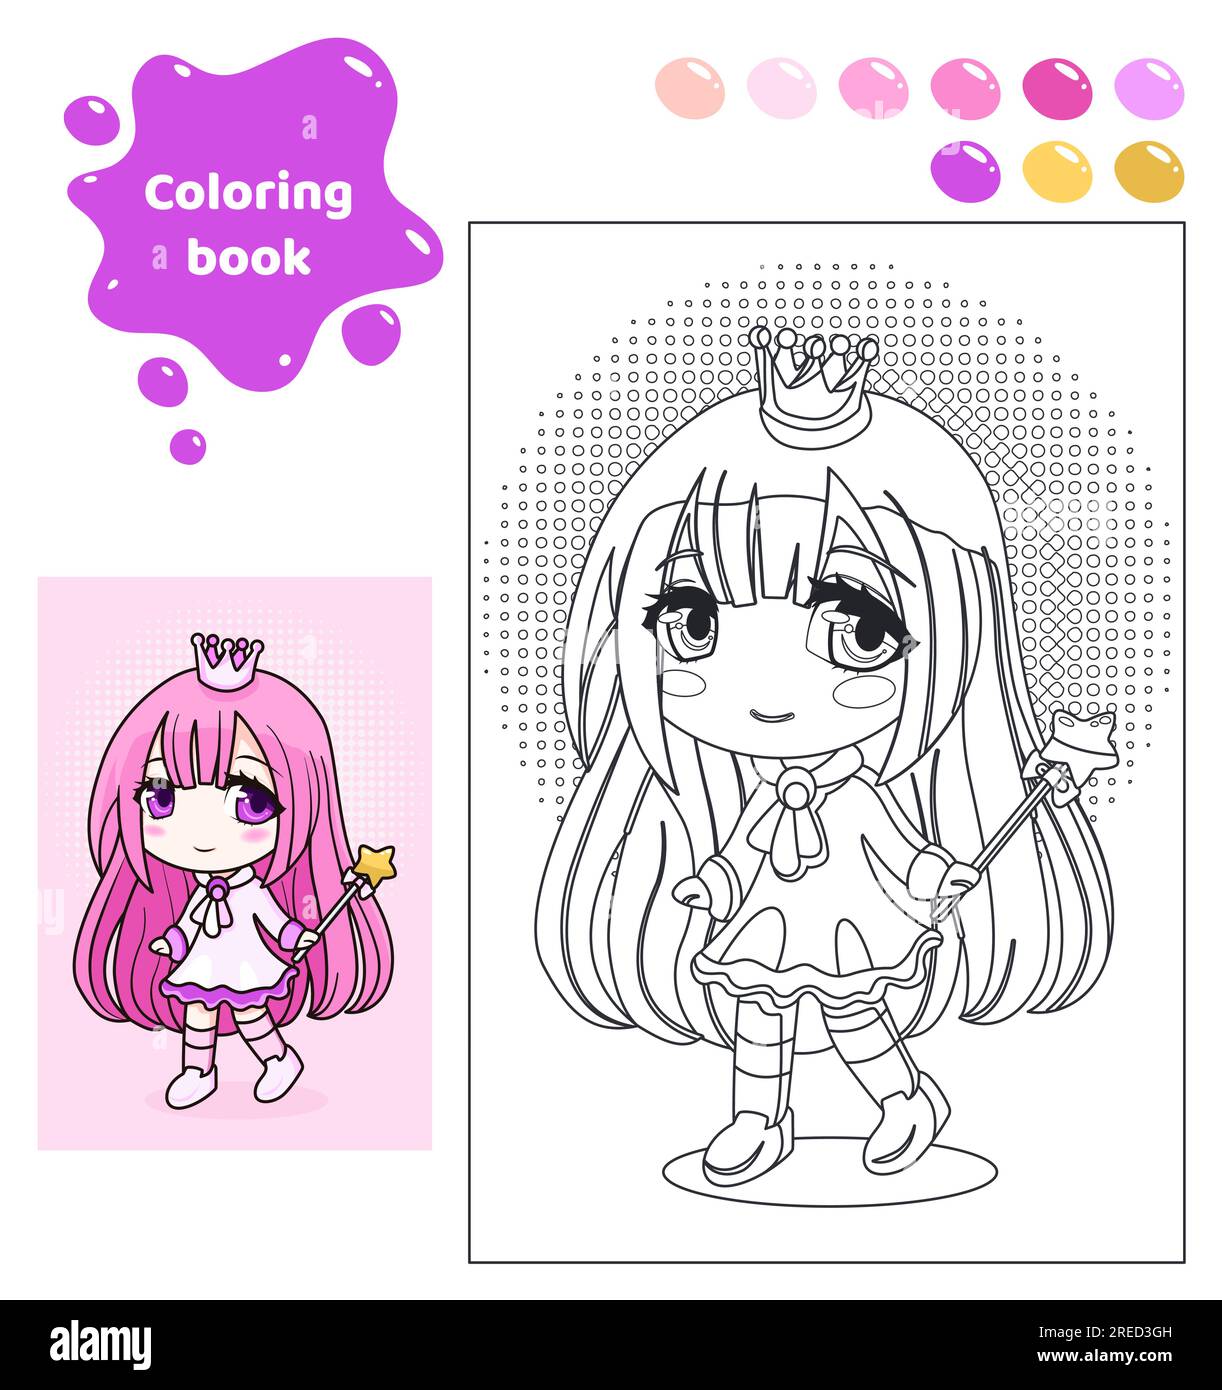 Coloring book for kids. Anime girl with crown. Stock Vector